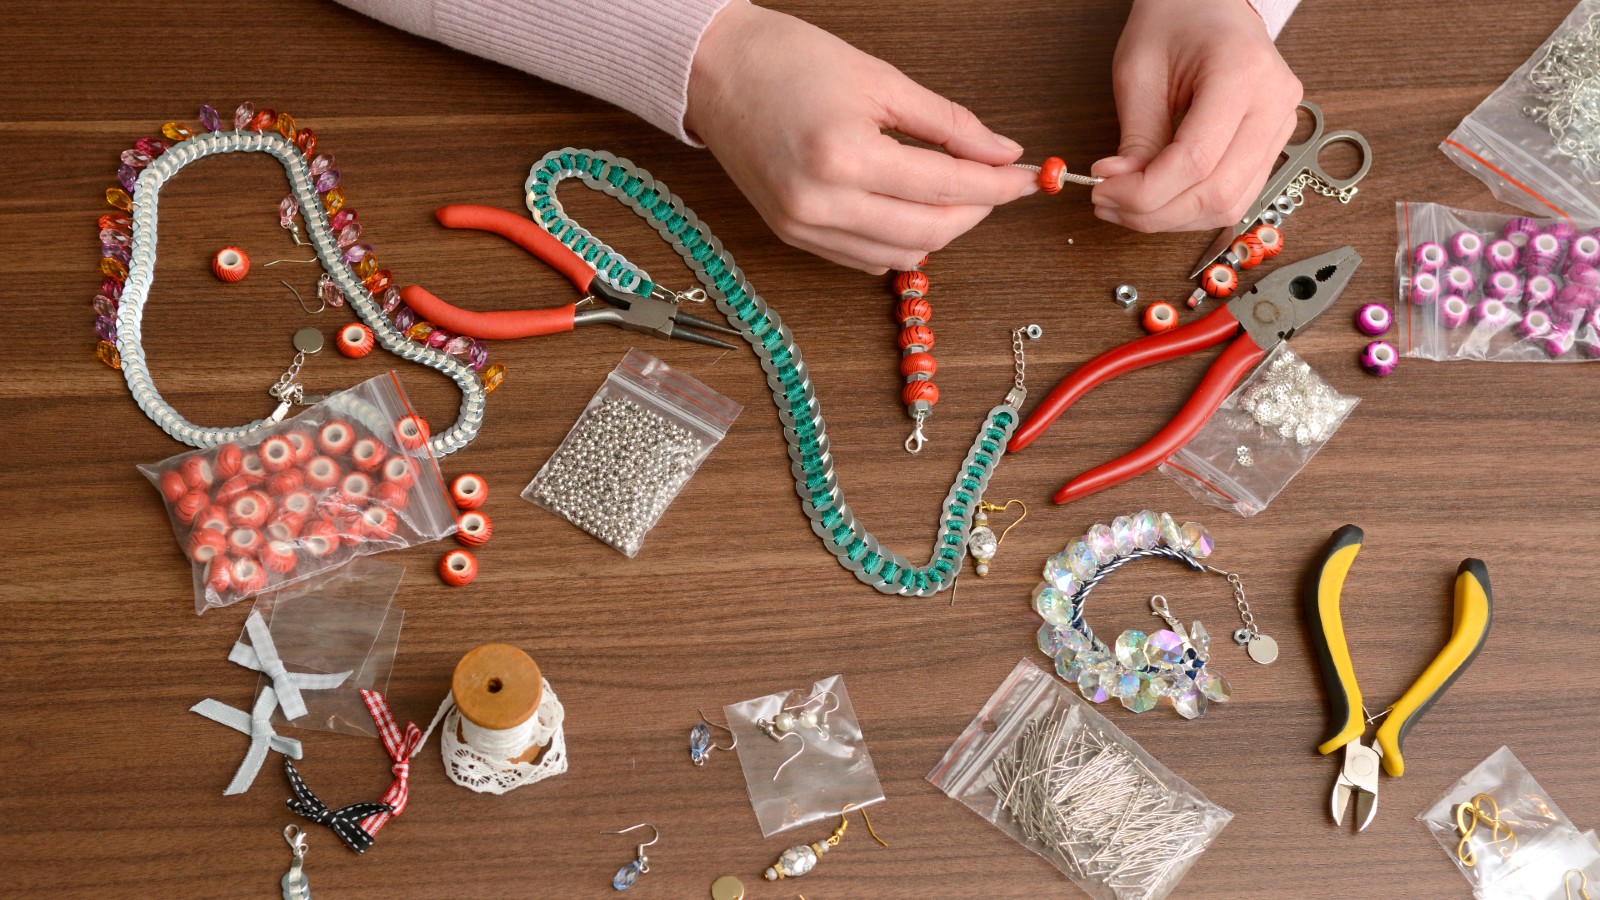 18 THINGS TO MAKE WITH BEADS (THAT AREN'T JEWELRY)